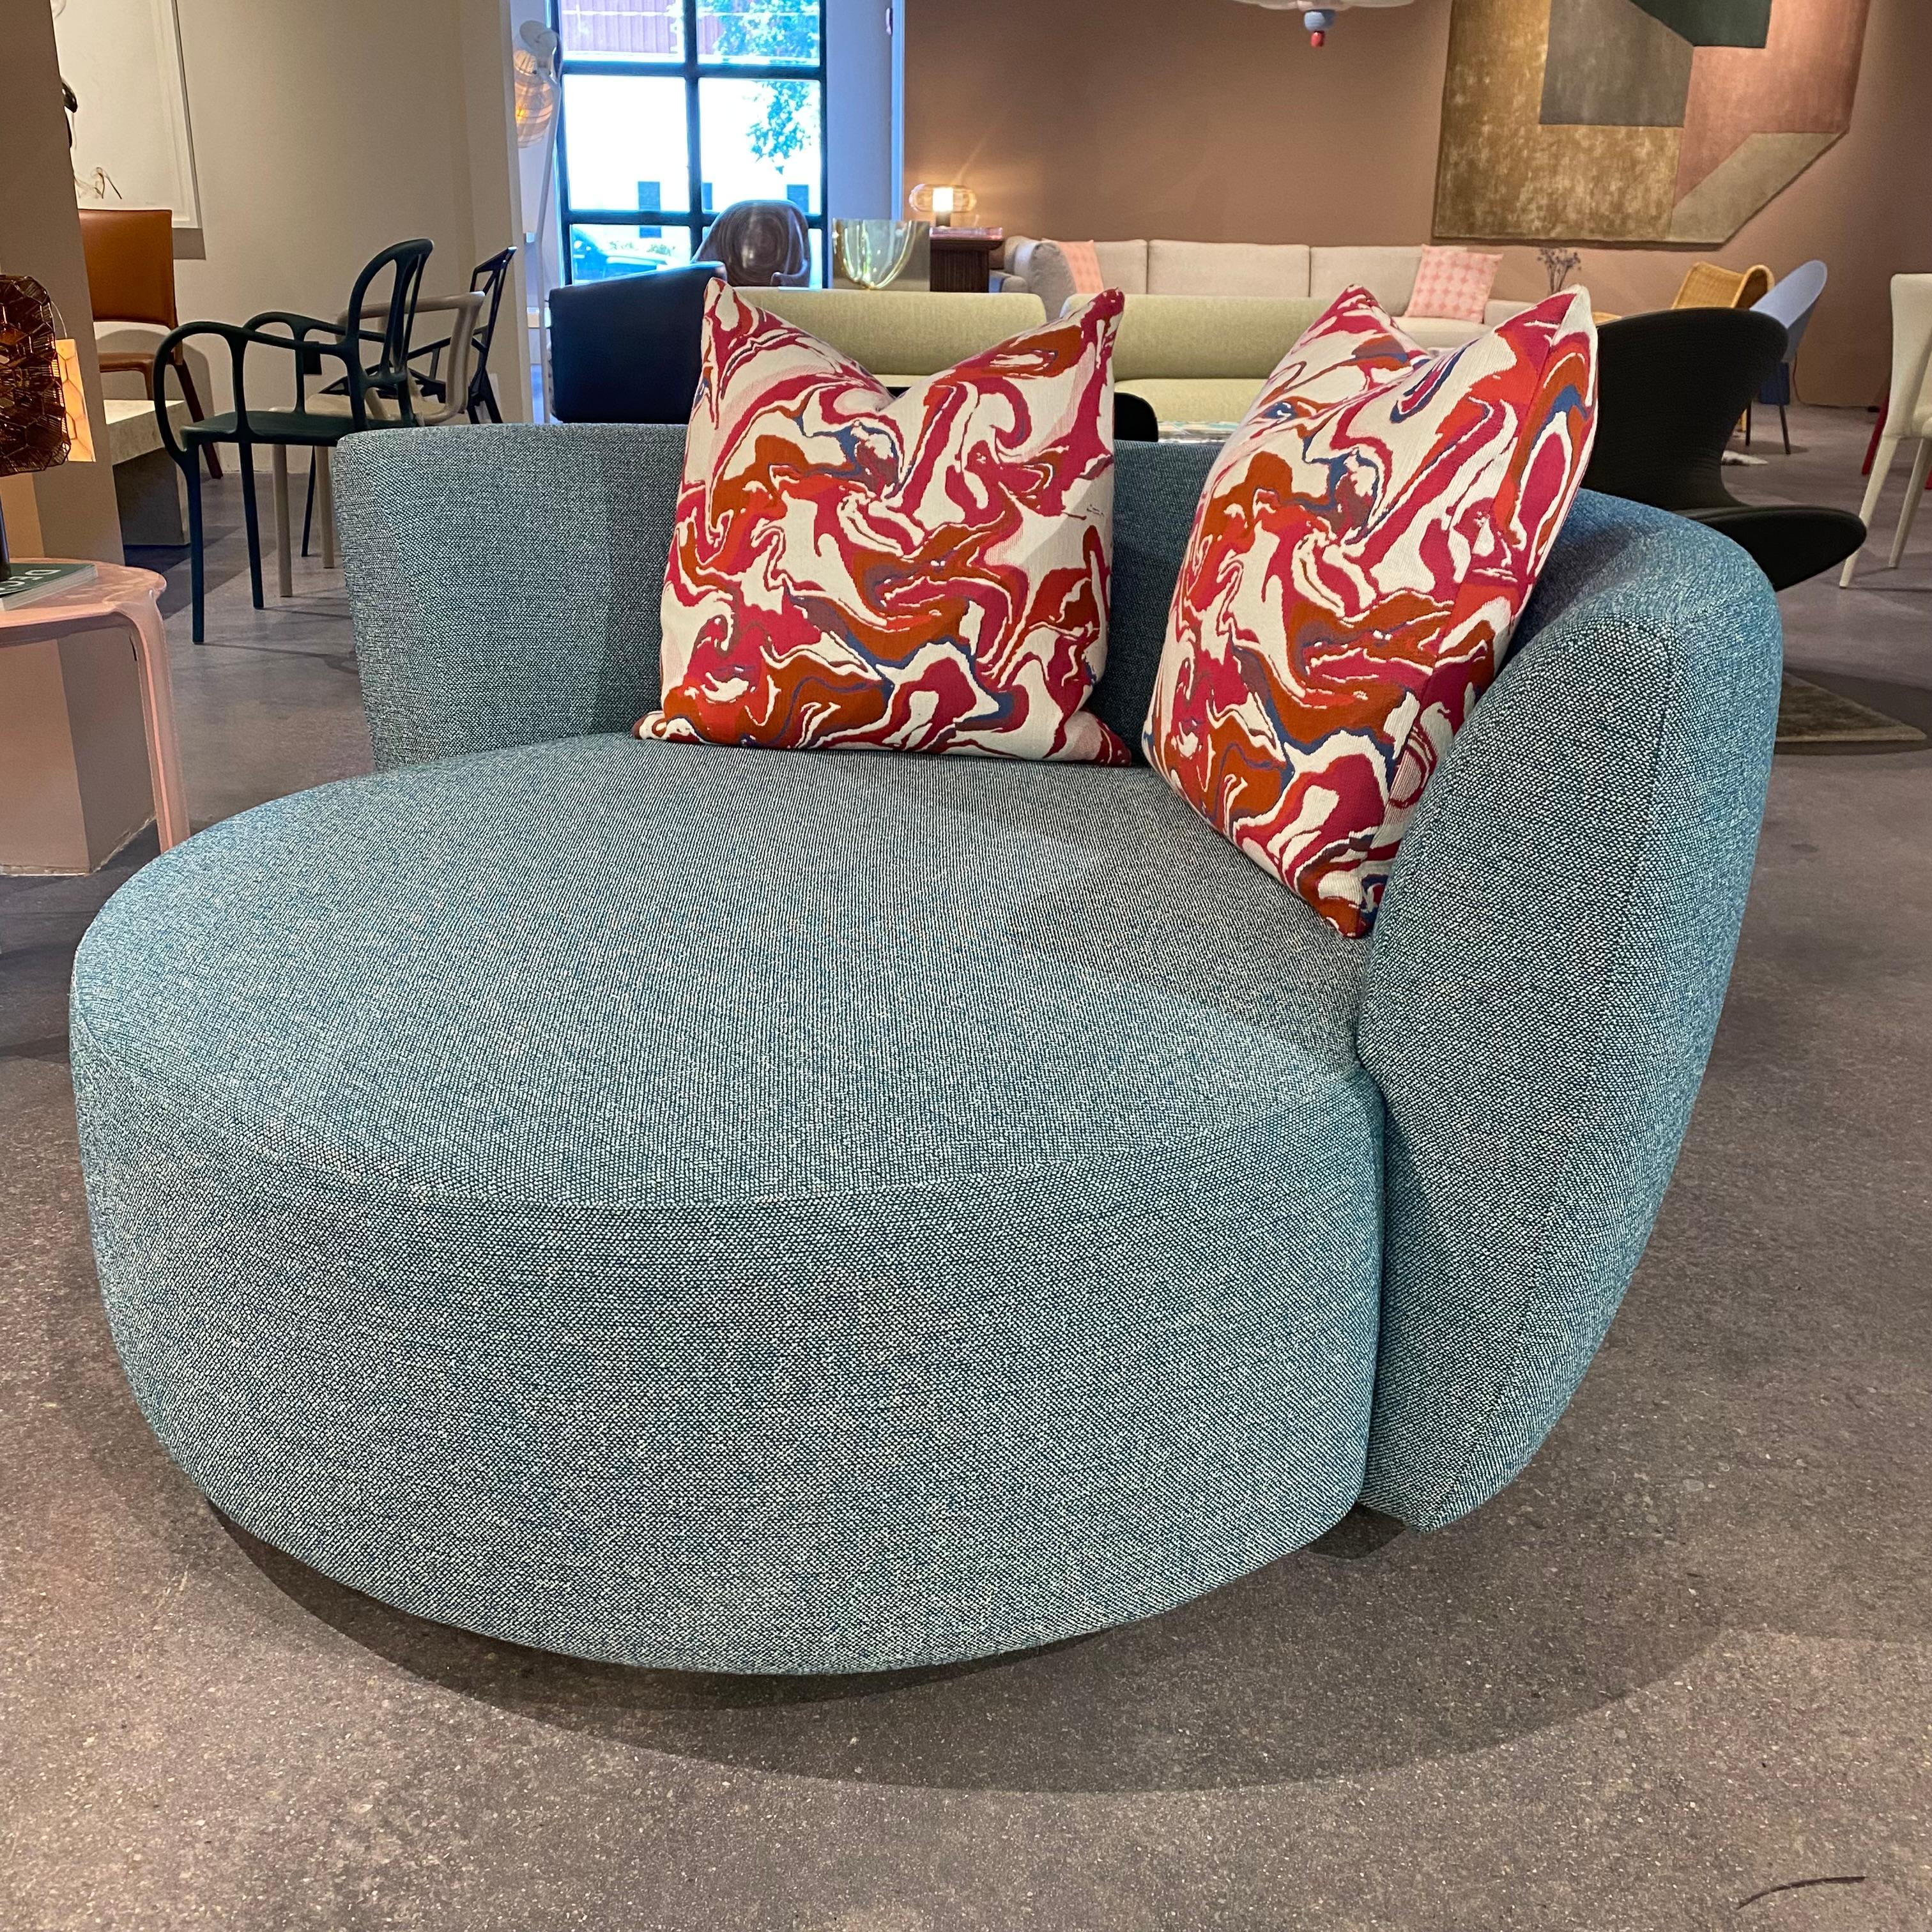 Beautiful upholstered chair from California manufacturer Della Robbia.  Wide and made for lounging.  This is a floor sample from our showroom but is in near perfect condition.  Originally $5788 now marked down to $2900